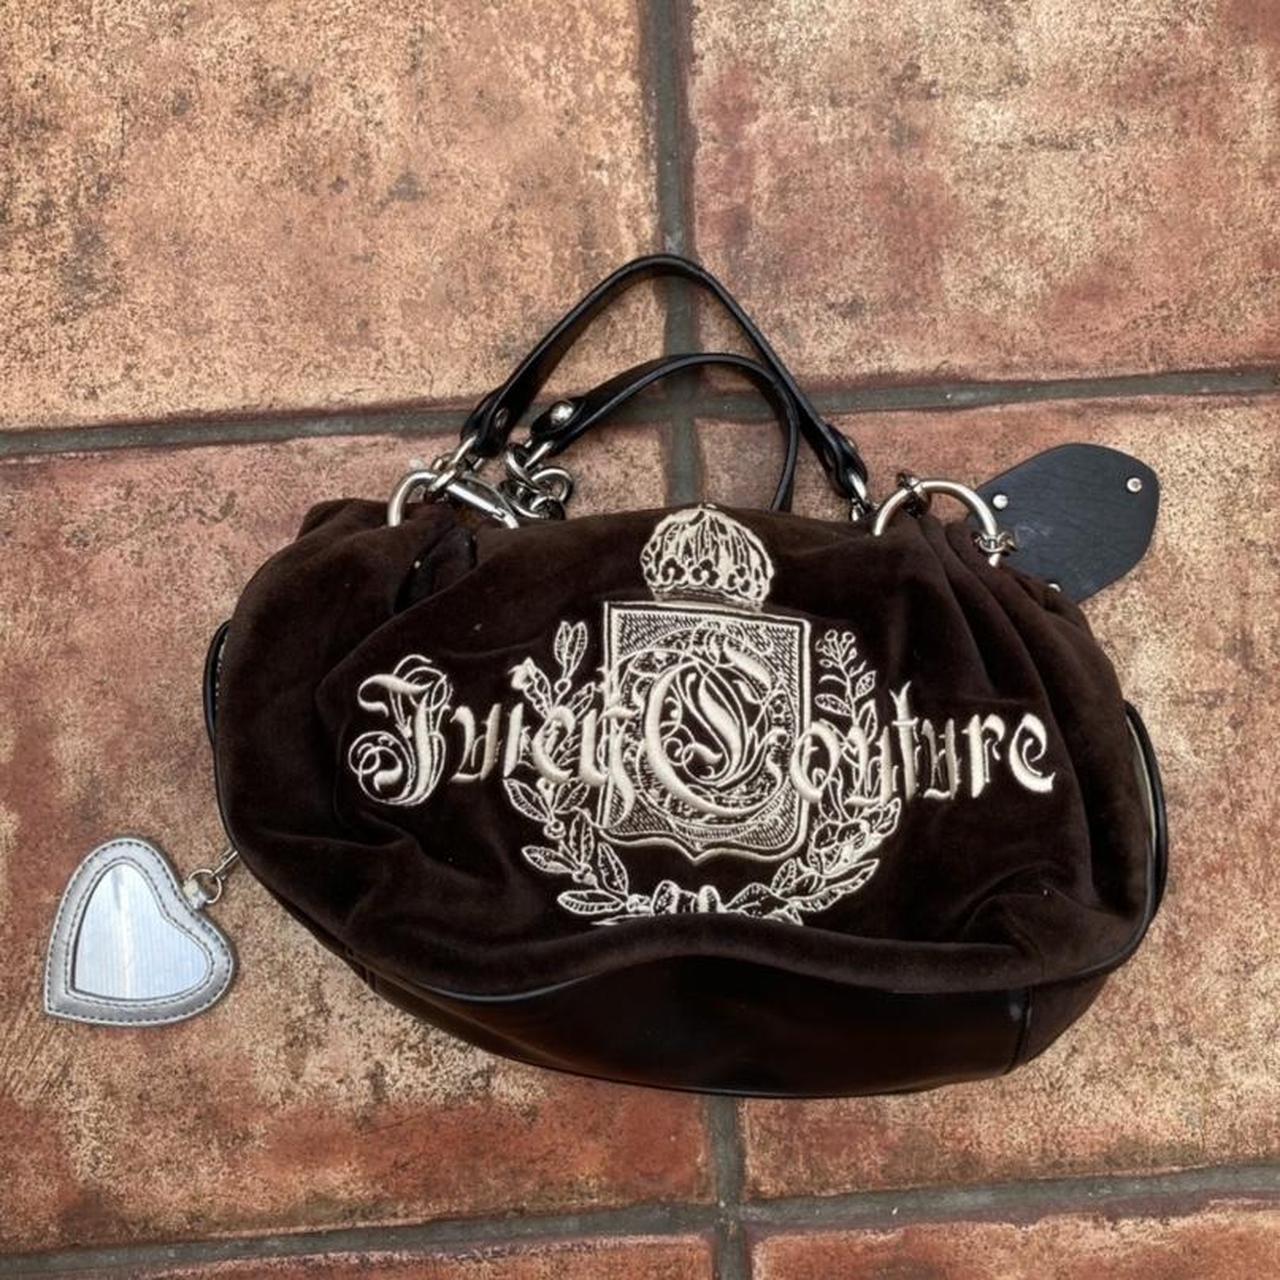 Genuine pink juicy couture bag from the early... - Depop